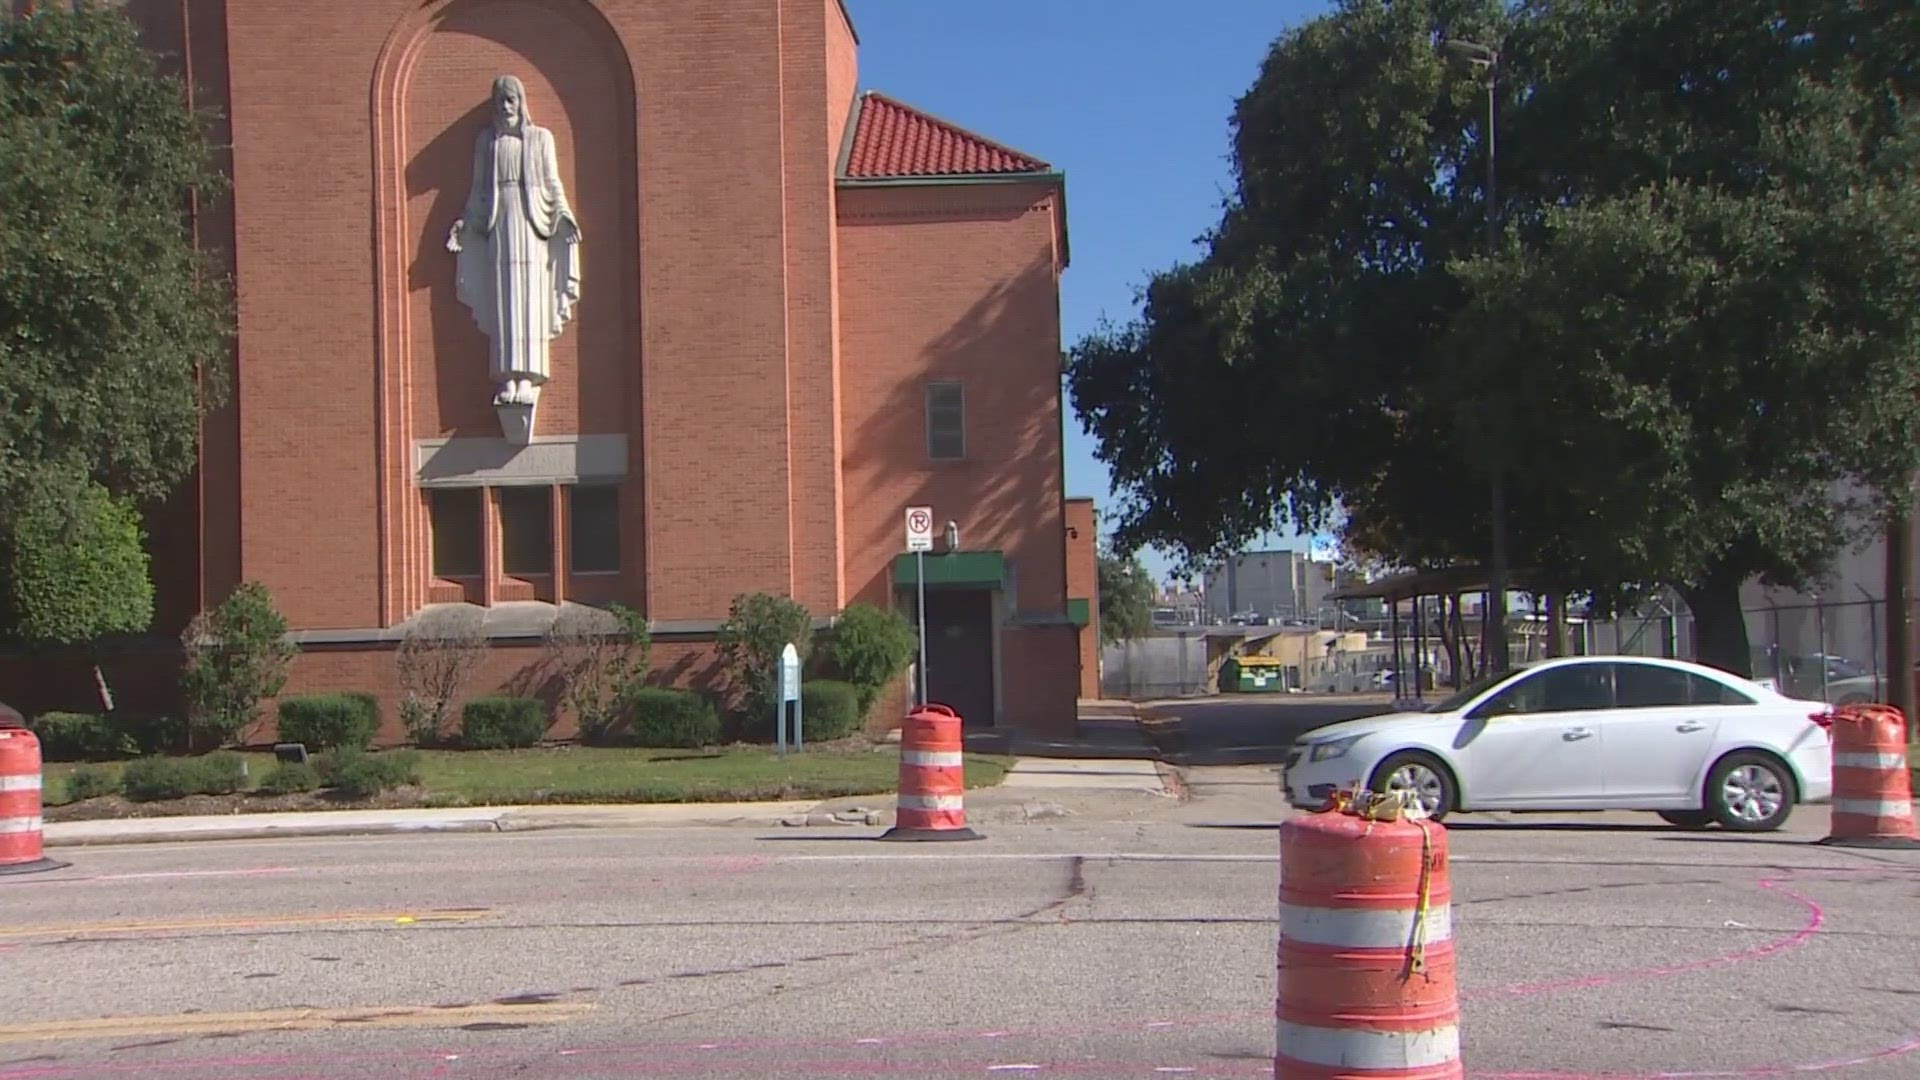 The $100,000 project stretches along Houston Avenue from Memorial to Center Street and will include a new median to better protect pedestrians.